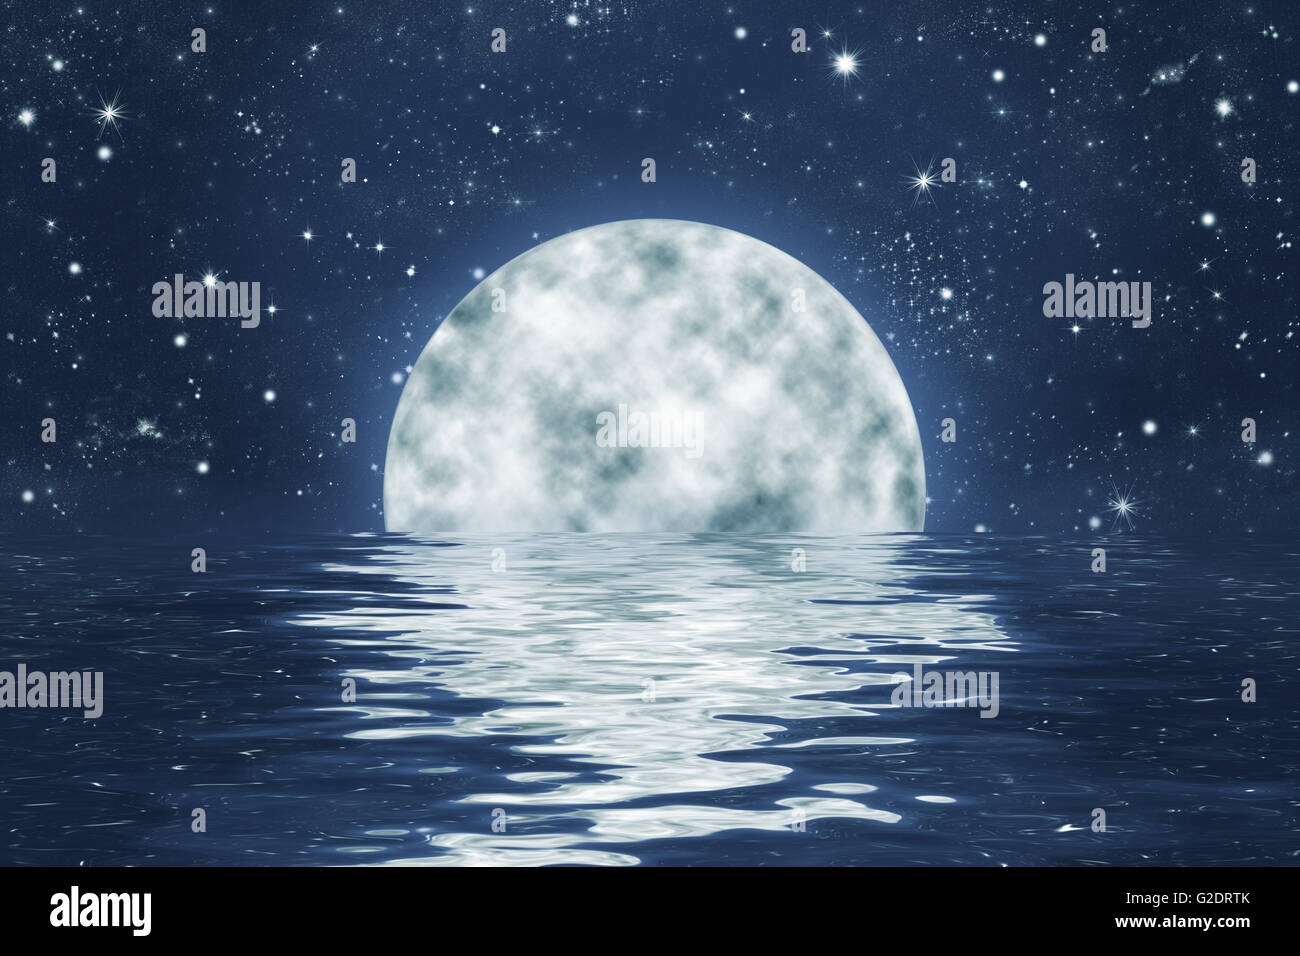 moon set over water with waves, with full moon on blue night sky with stars Stock Photo